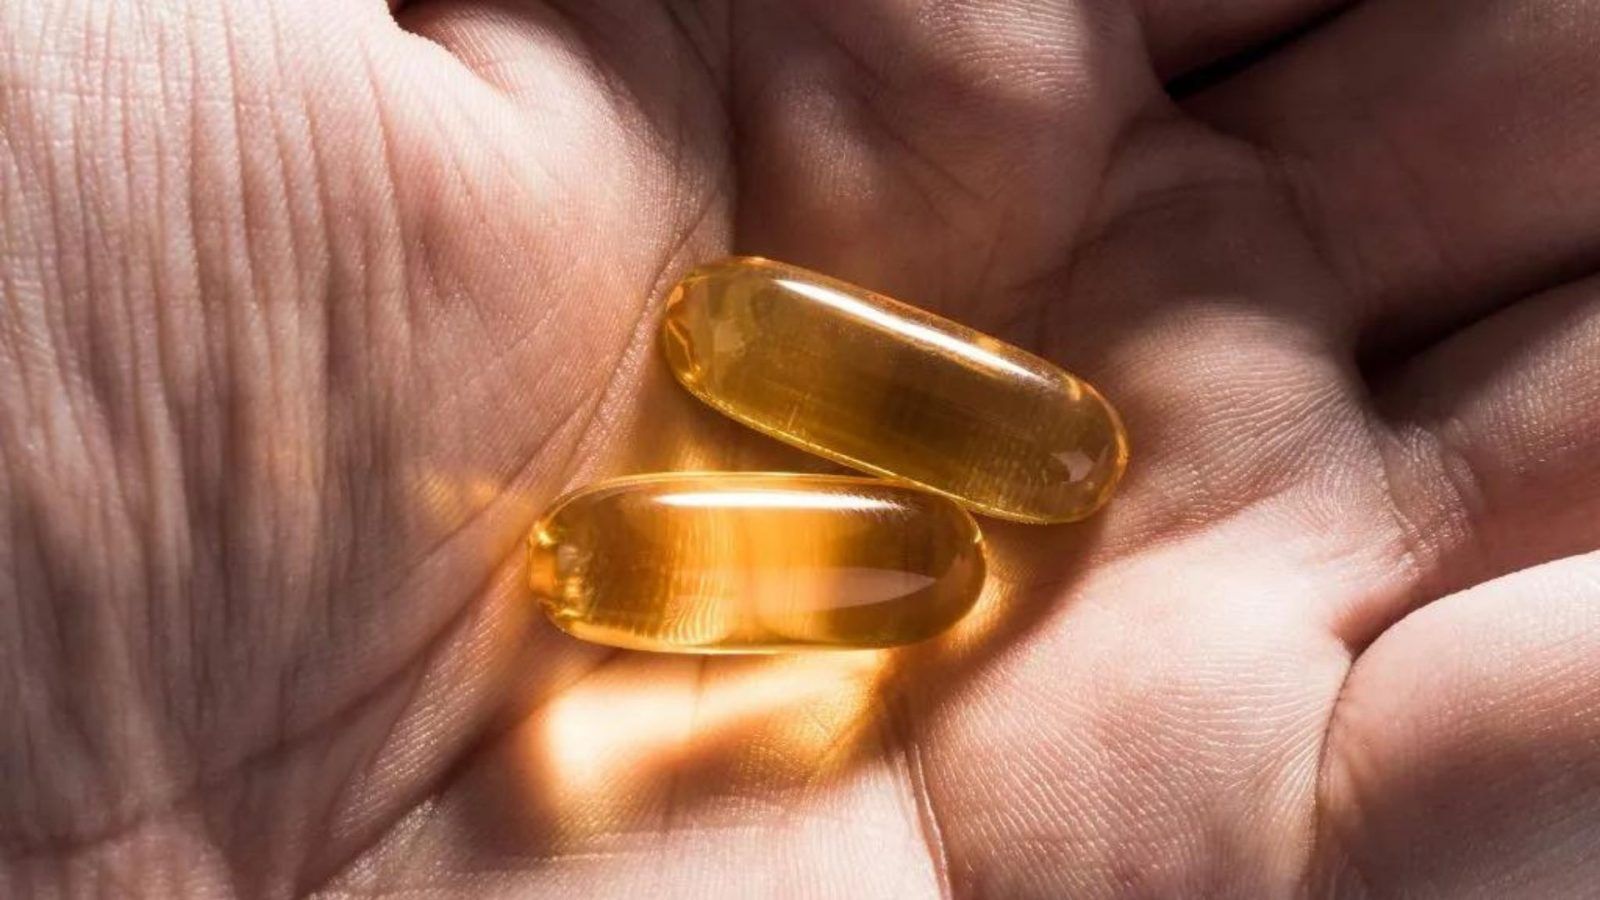 Is Vitamin D overrated? Another study casts doubt on the benefits